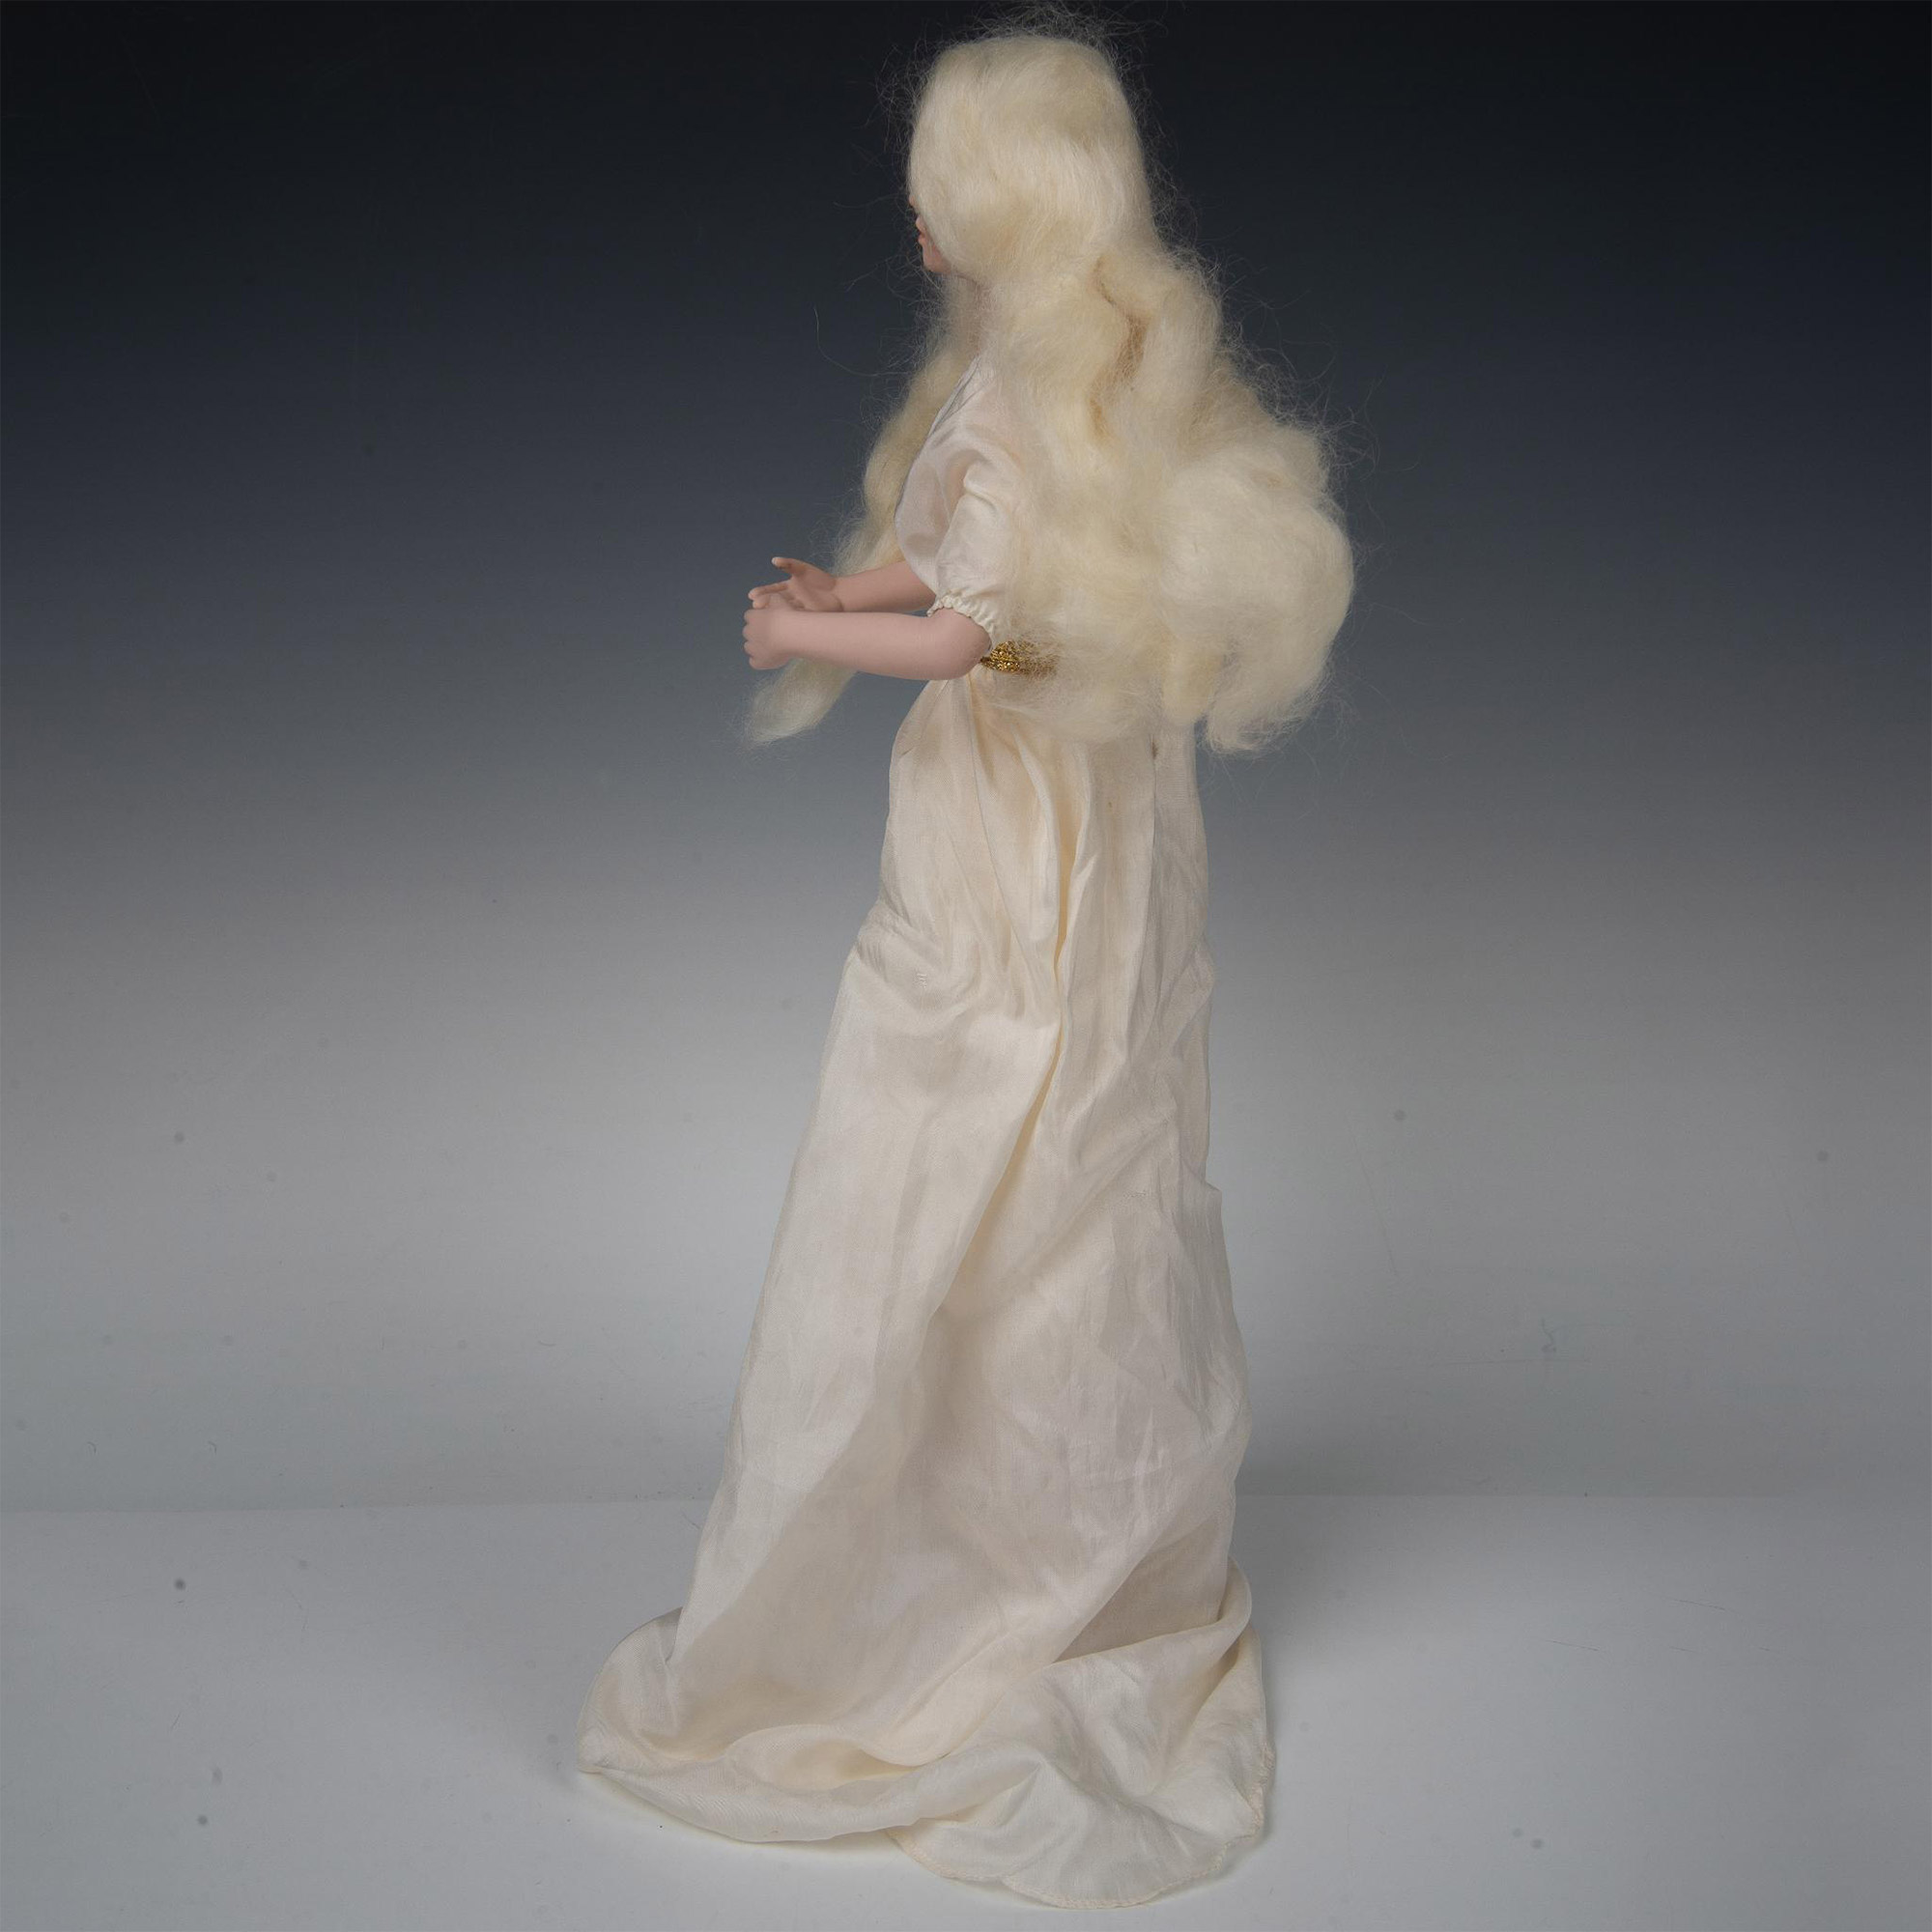 International Treasury of Collectibles Doll, Miss Liberty - Image 14 of 14